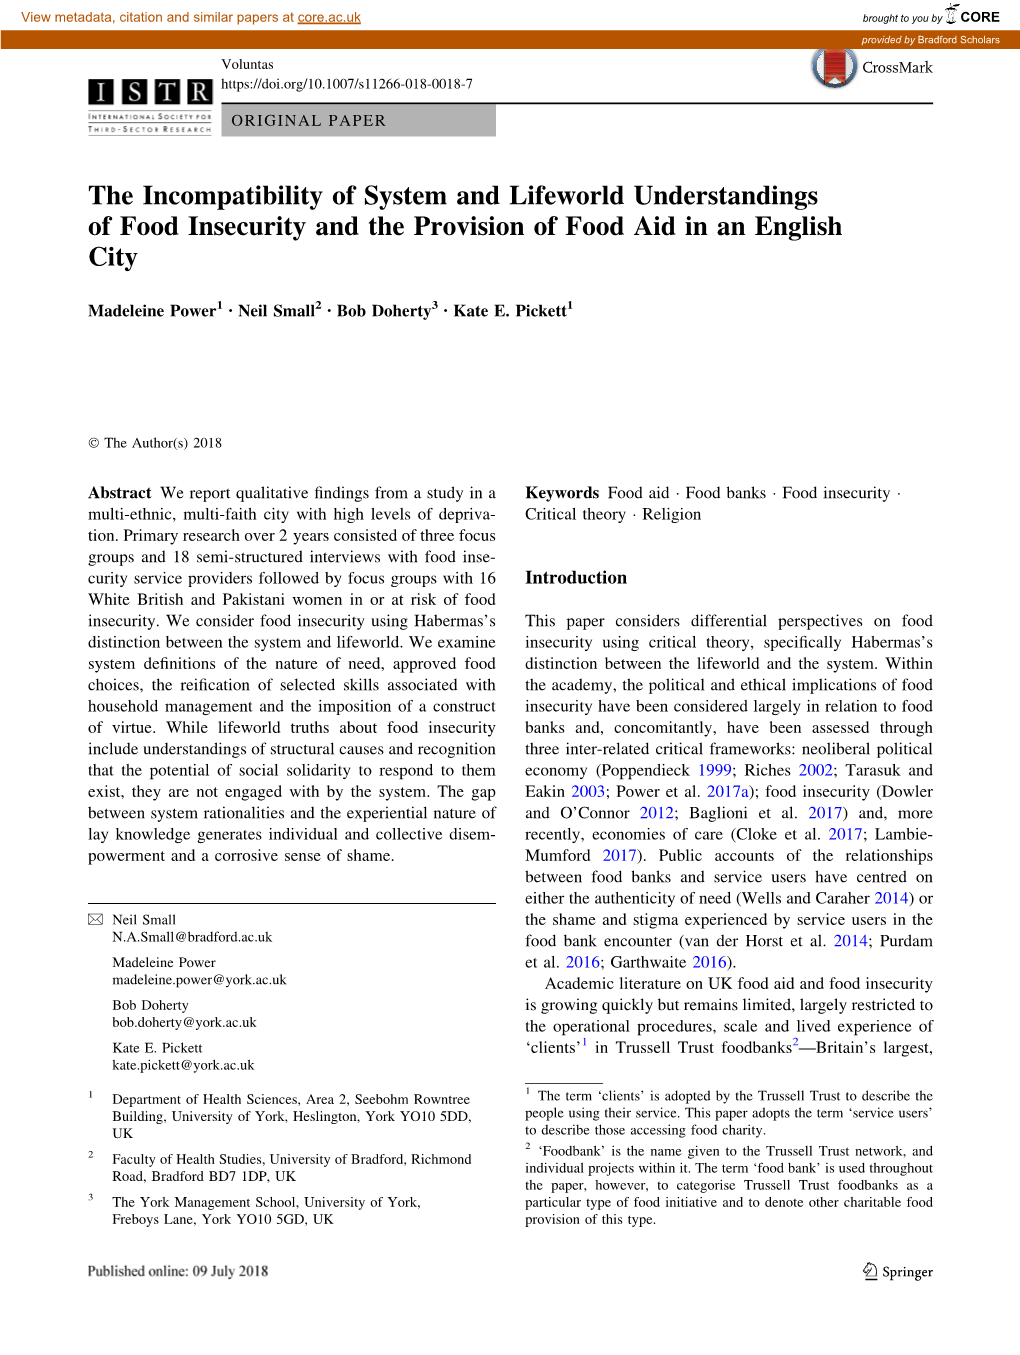 The Incompatibility of System and Lifeworld Understandings of Food Insecurity and the Provision of Food Aid in an English City